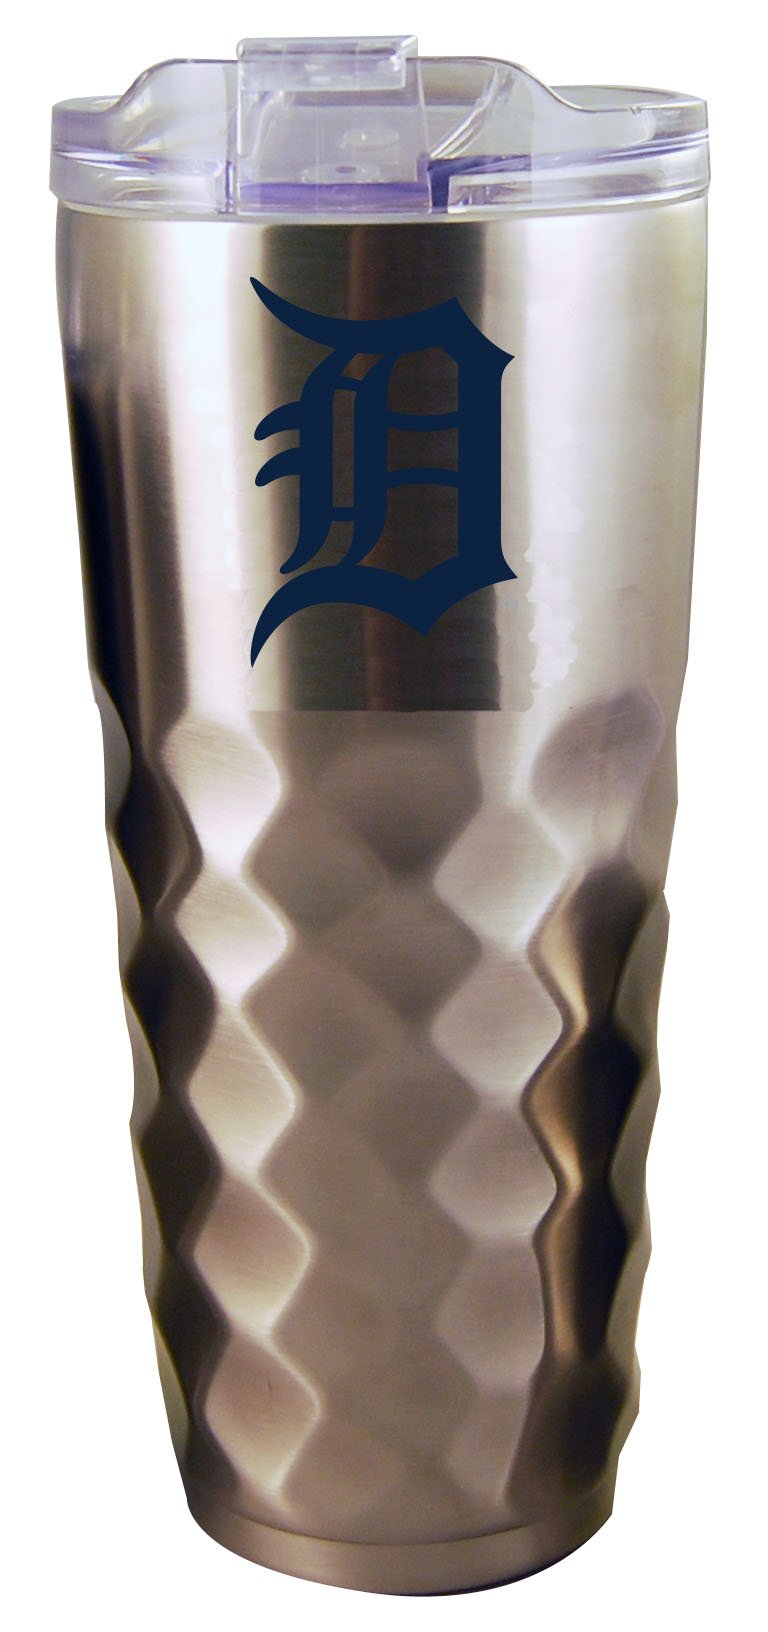 32OZ SS DIAMD TMBLR TIGERS
CurrentProduct, Detroit Tigers, Drinkware_category_All, DTI, MLB
The Memory Company